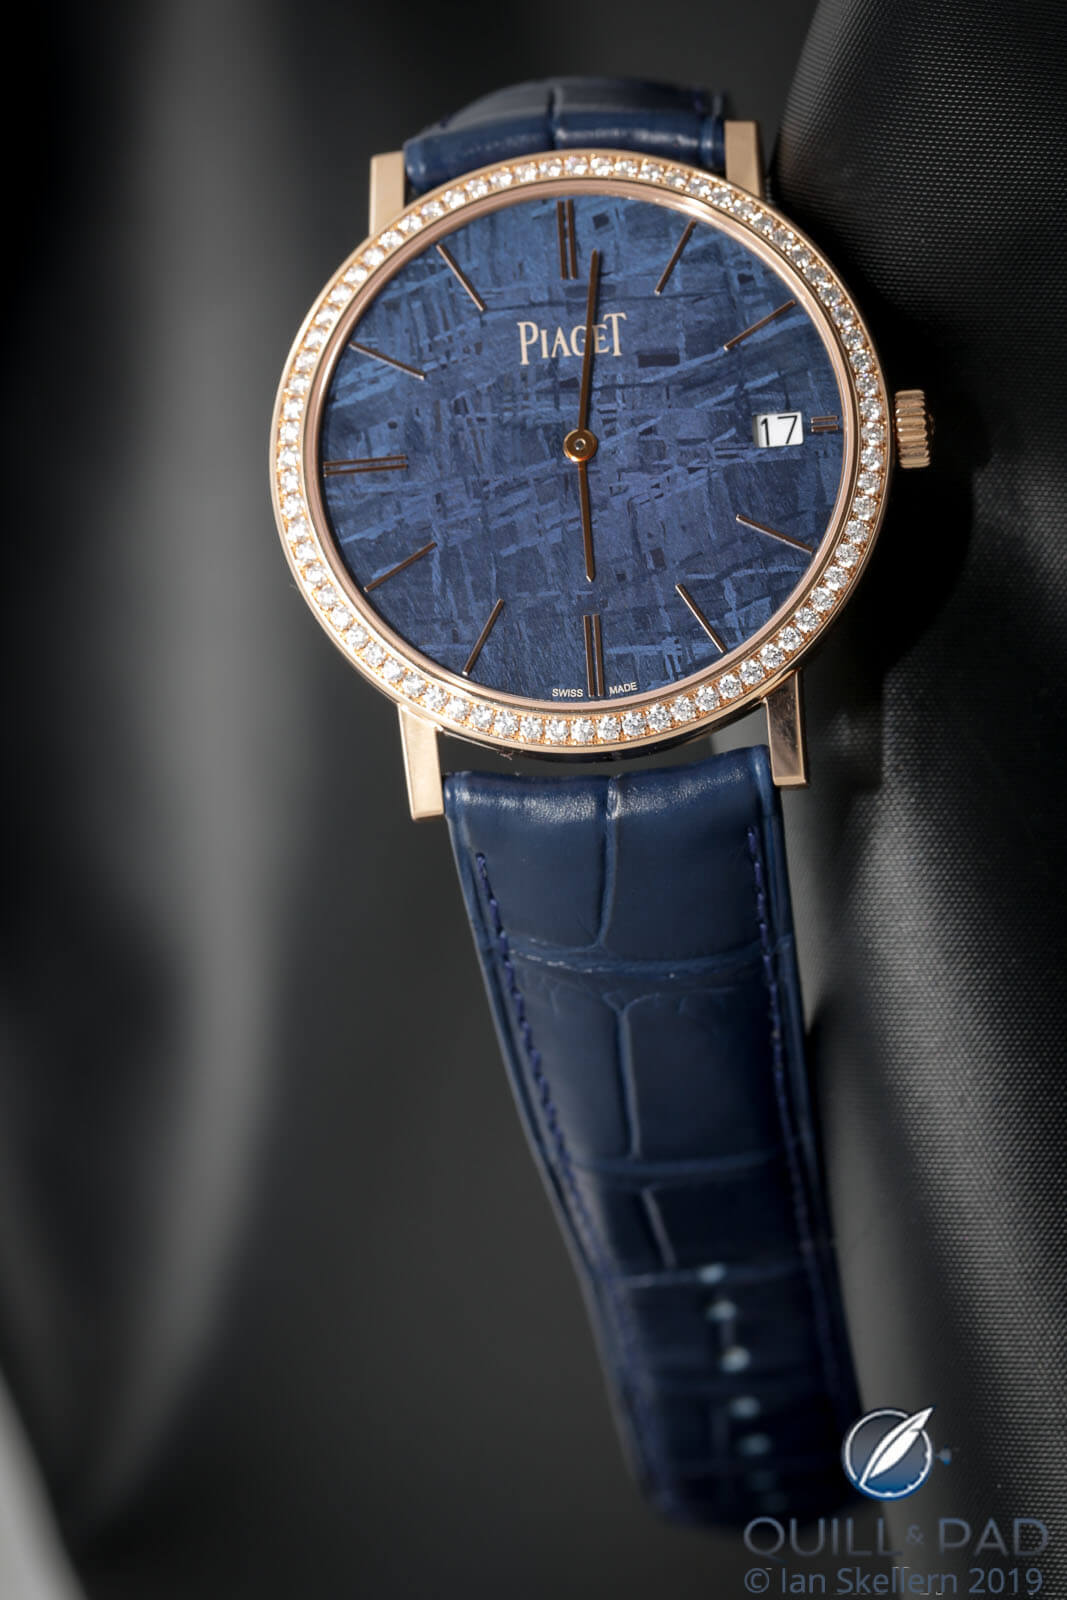 Piaget Altiplano with stone dial